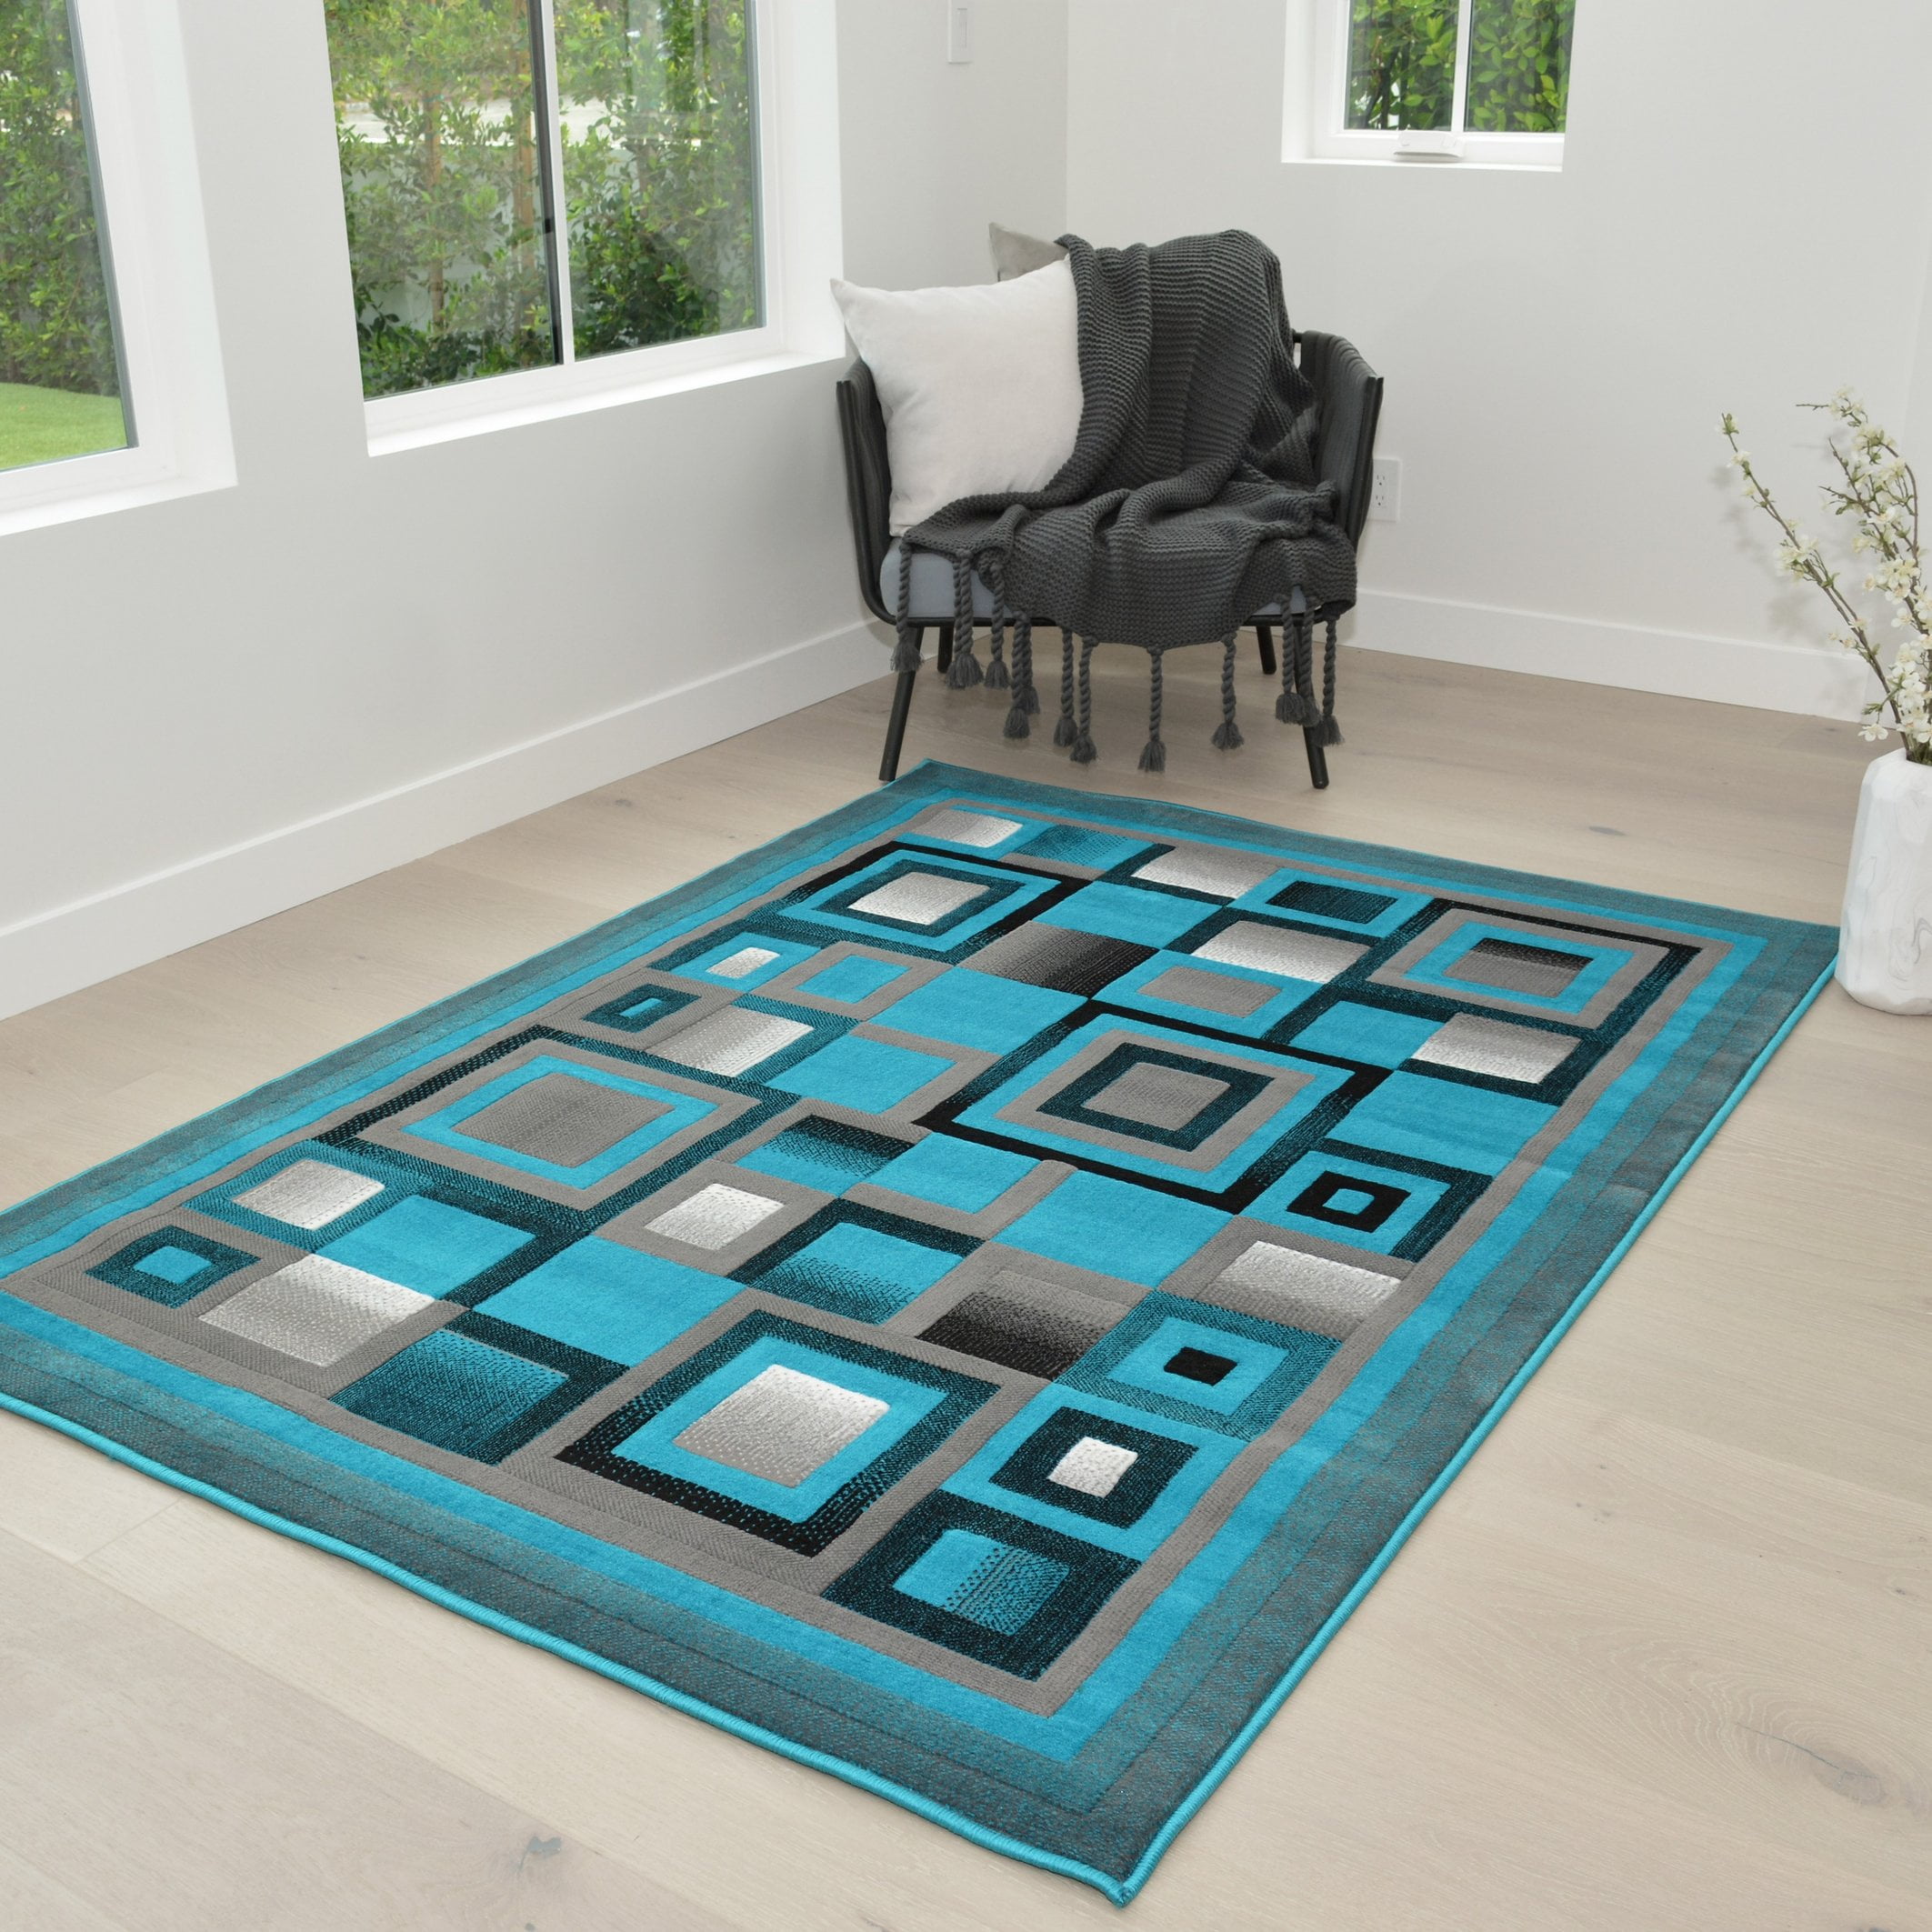 HR Rugs Turquoise Gray and Black Abstract Geometric Modern Squares